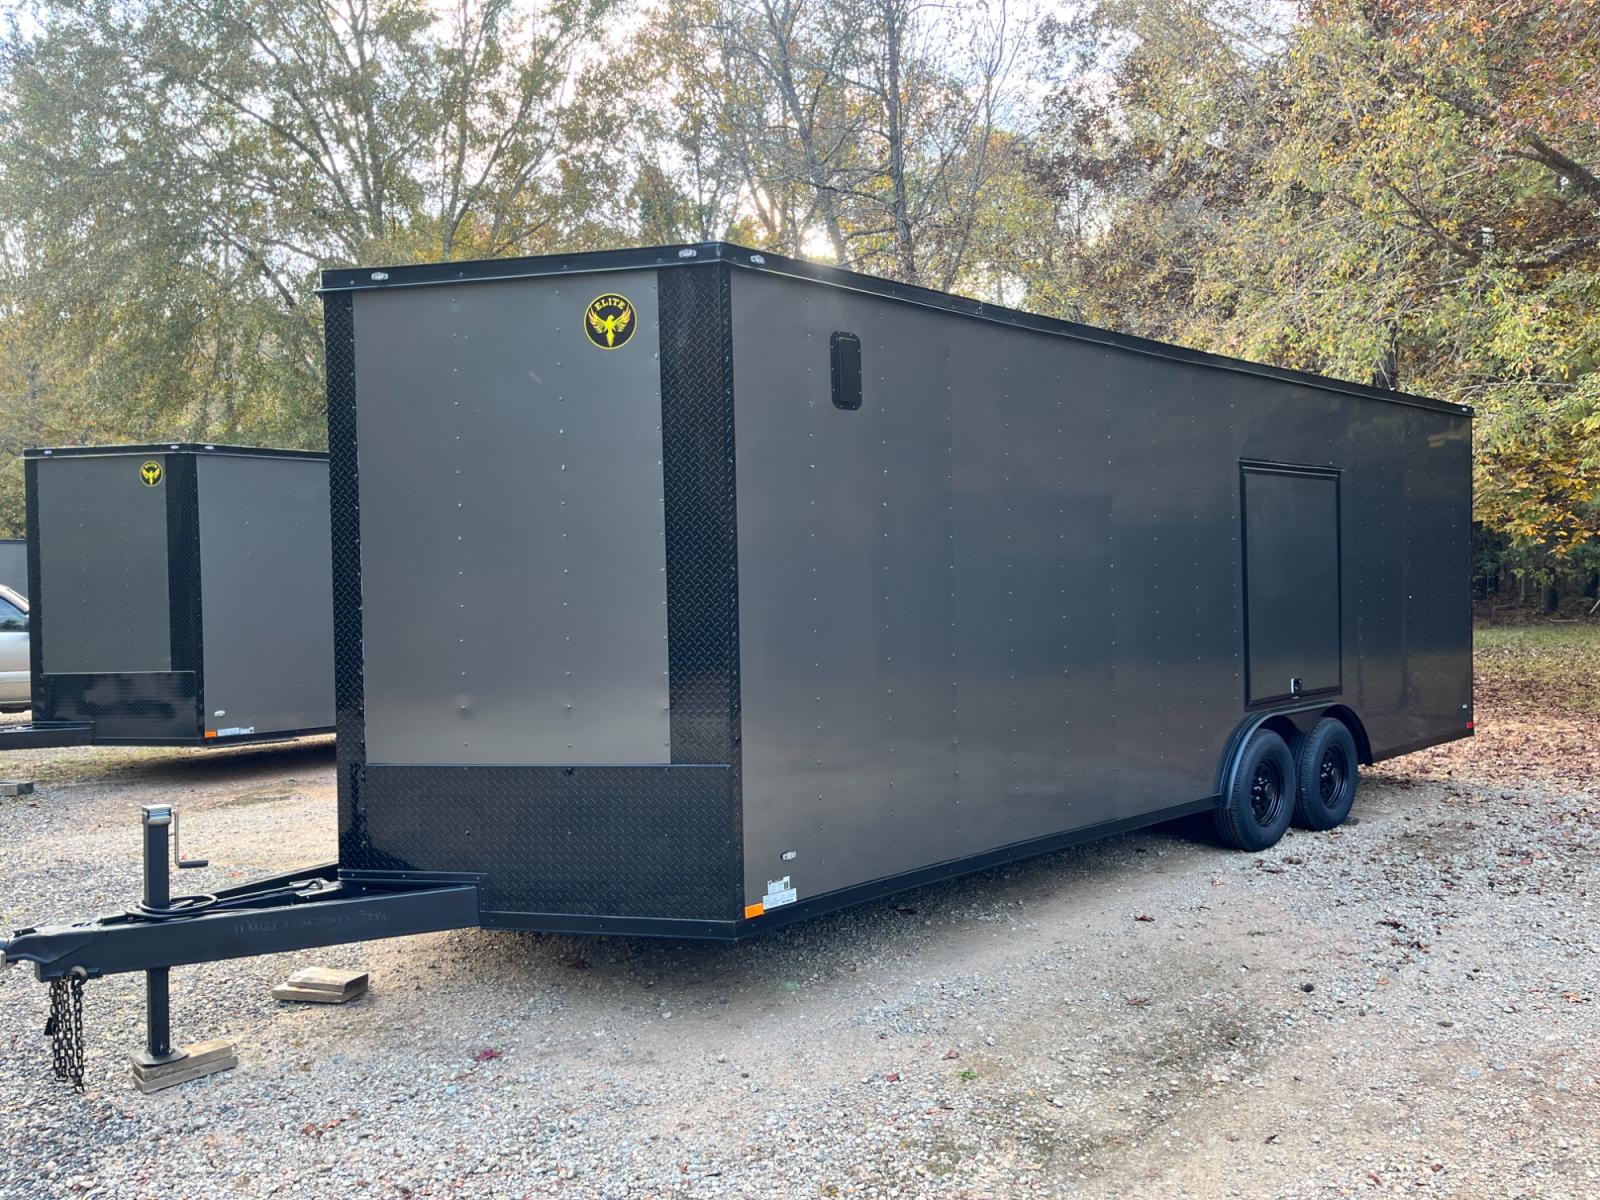 2023 .080 Charcoal Metallic w/Black Out Pkg. Elite Cargo 8.5ft X 24ft Tandem , located at 1330 Rainey Rd., Macon, 31220, (478) 960-1044, 32.845638, -83.778687 - Brand New 2023 Model Elite Cargo Trailer, Made Tifton, GA 7ft 4" Tall Inside Height, Air Conditioner, Insulated too! 15,500 BTU A/C Unit, 5 Inside LED Light Strips! Lights Up Really Bright Inside! This Deluxe Enclosed Car Hauler has Awesome Features! .080 Thick Charcoal Metallic Skin! Stunning - Photo #2